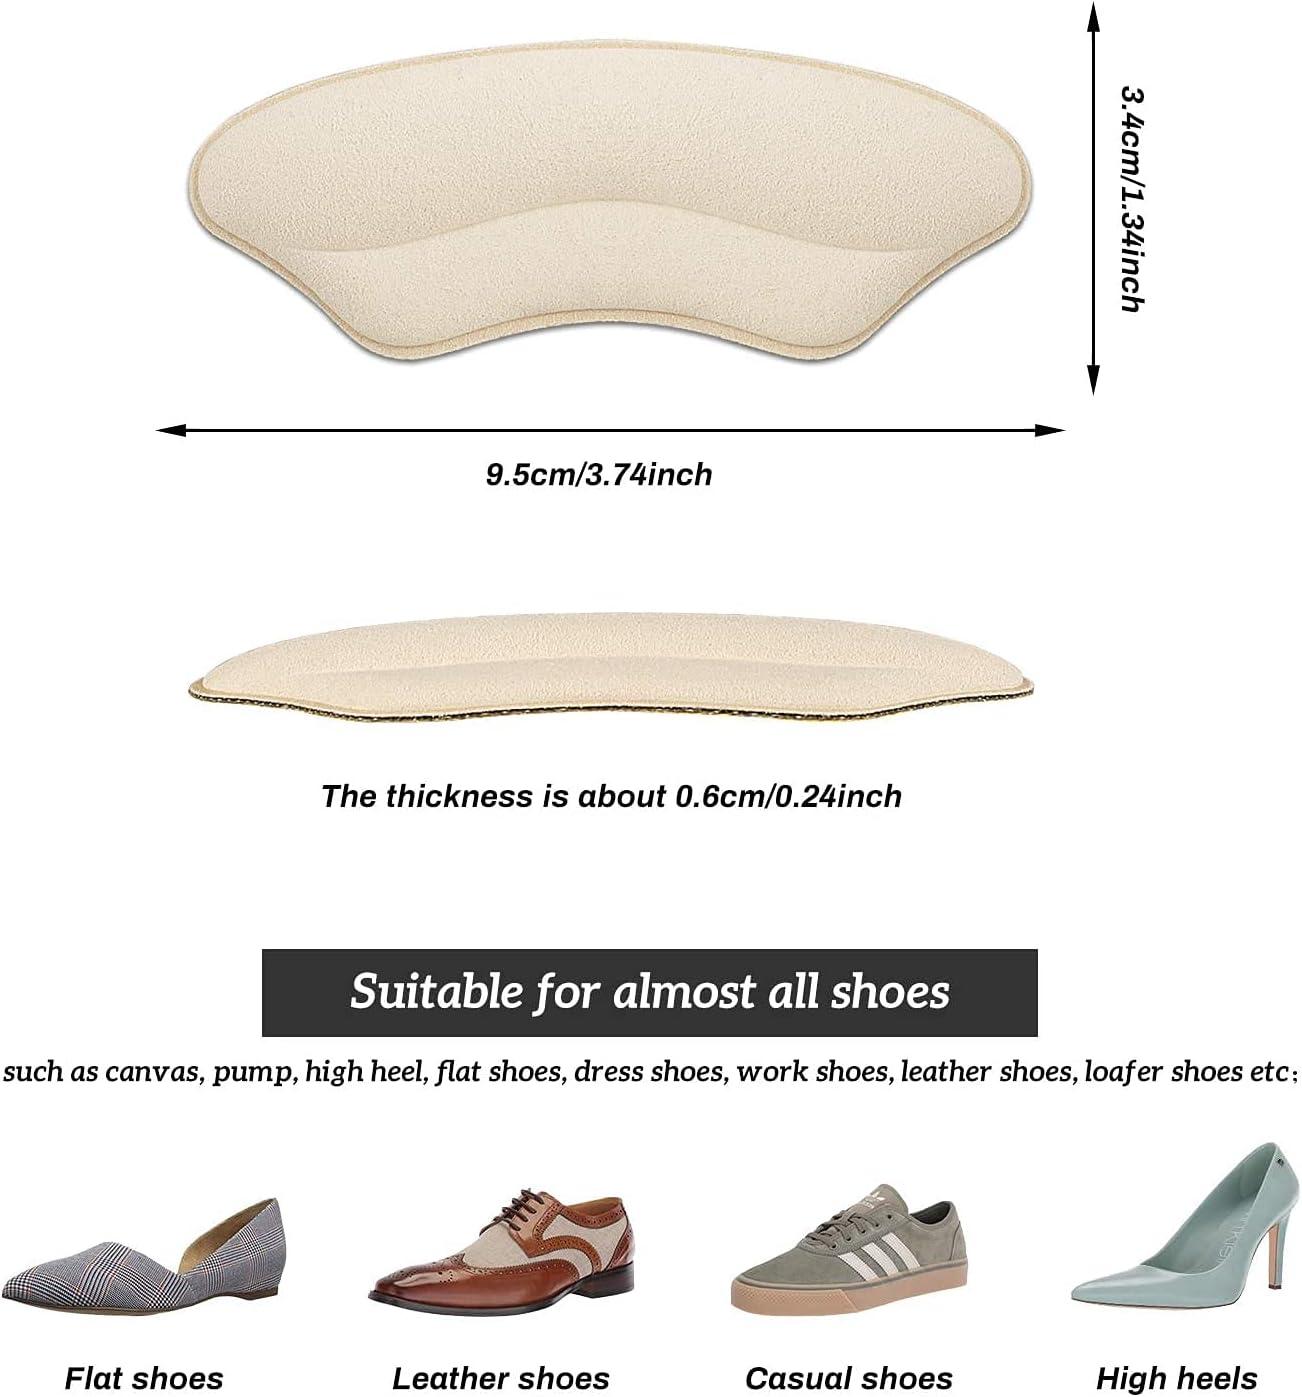 Heel protectors are heroes that save shoes | Quirk Heaven